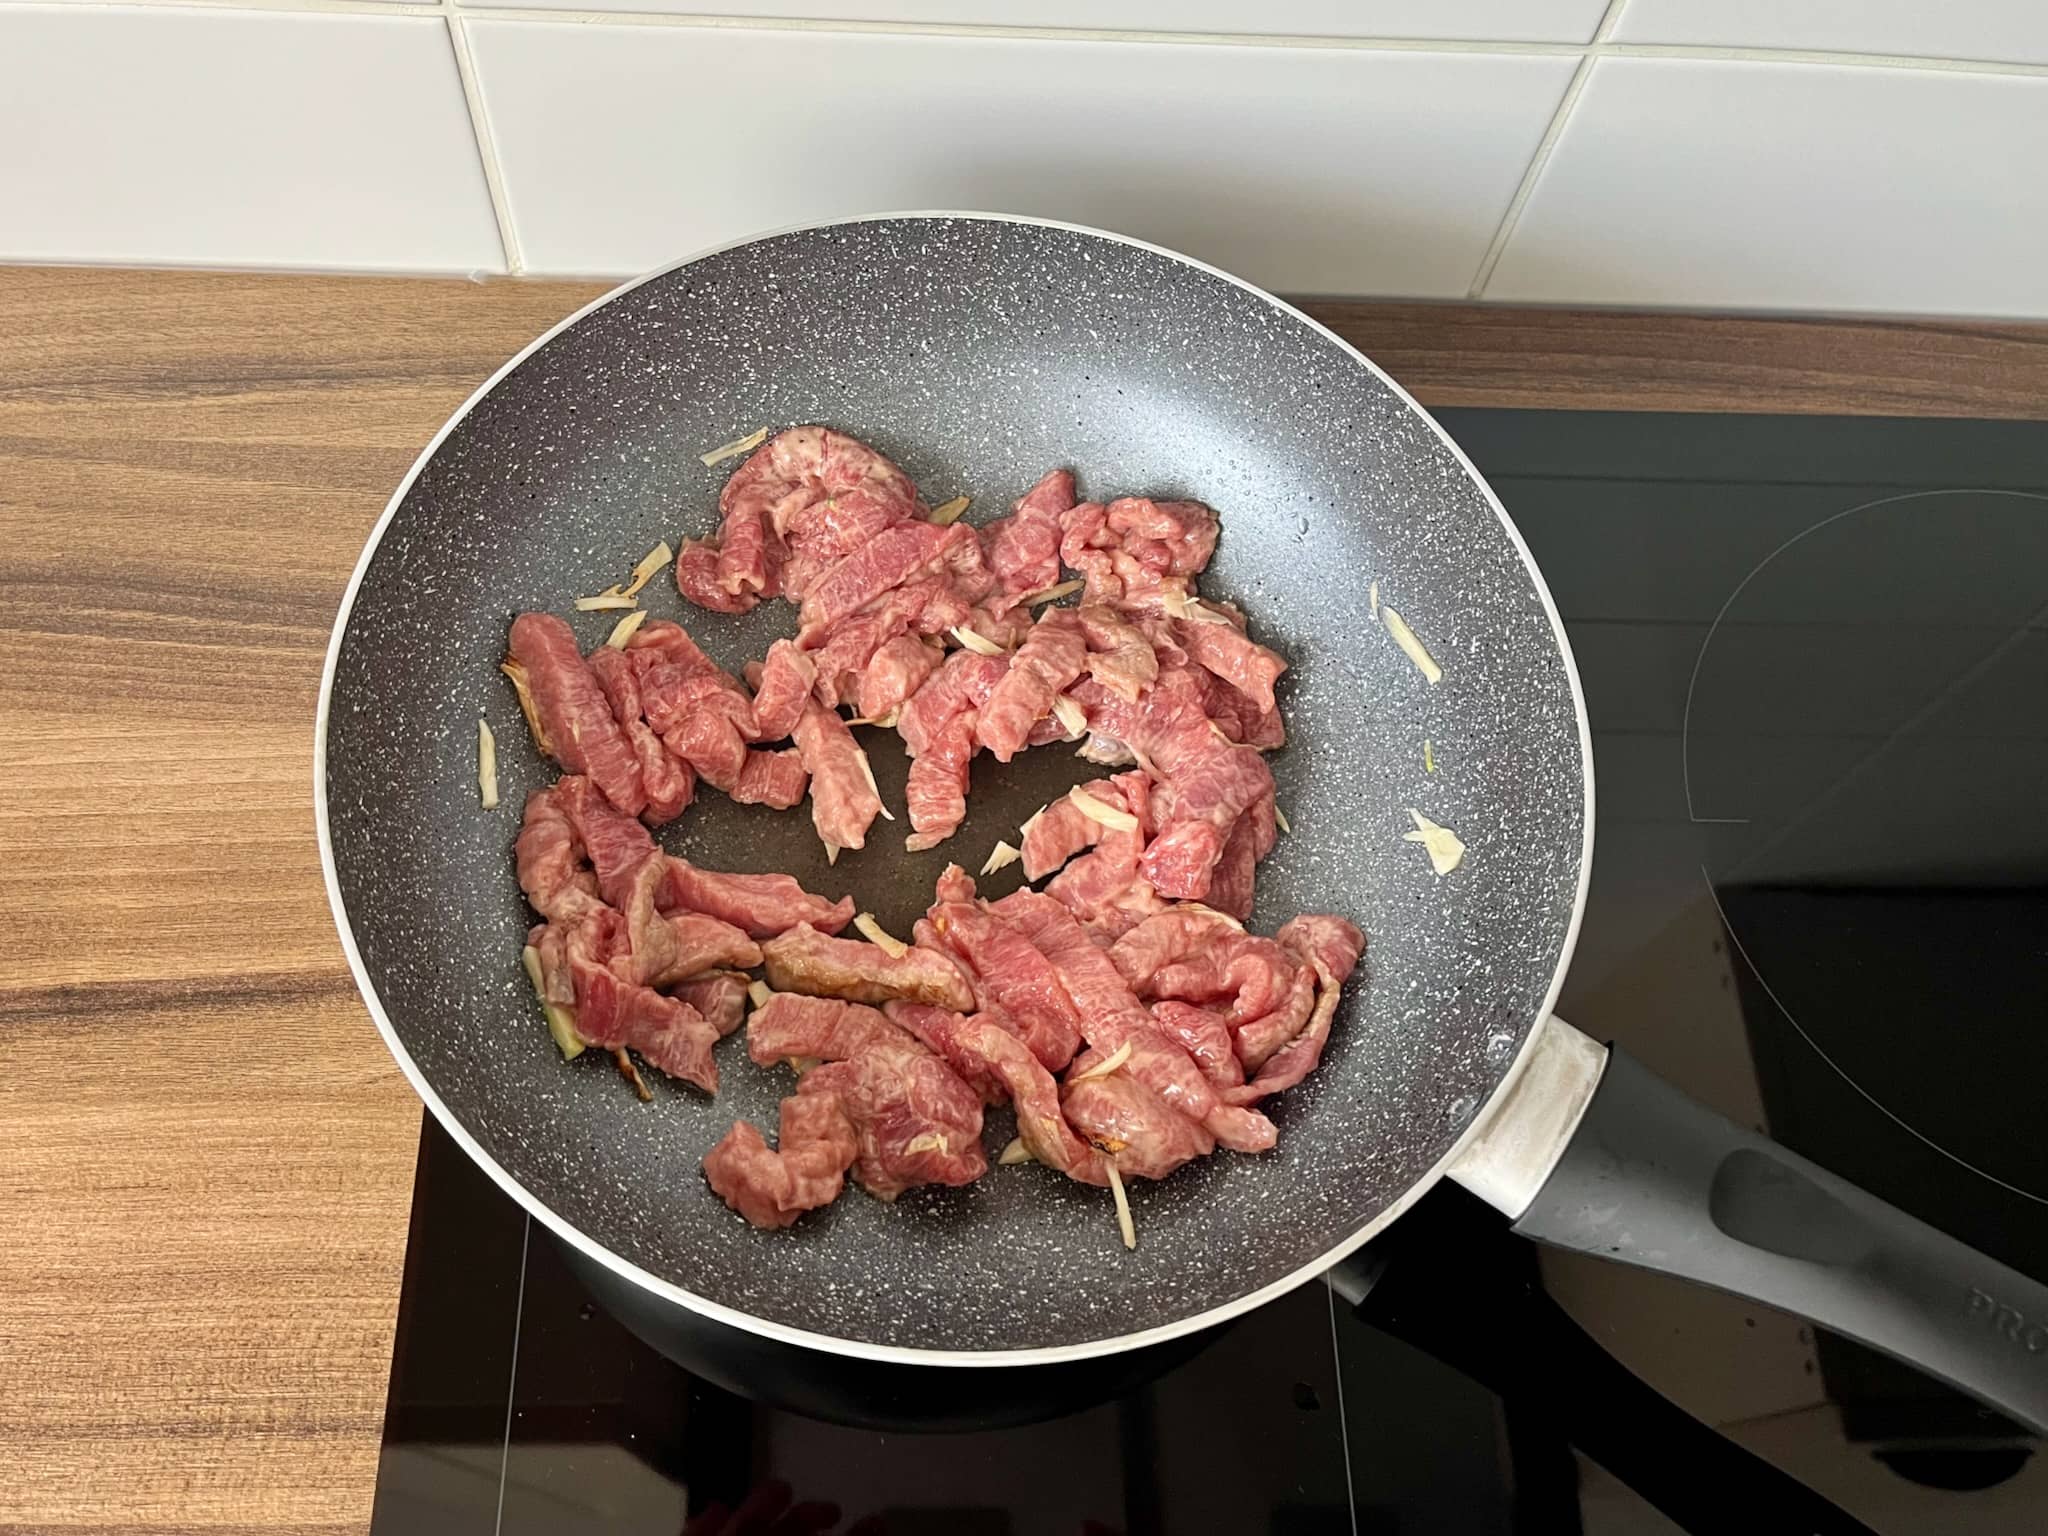 Beef and garlic in a pan ready to be fried